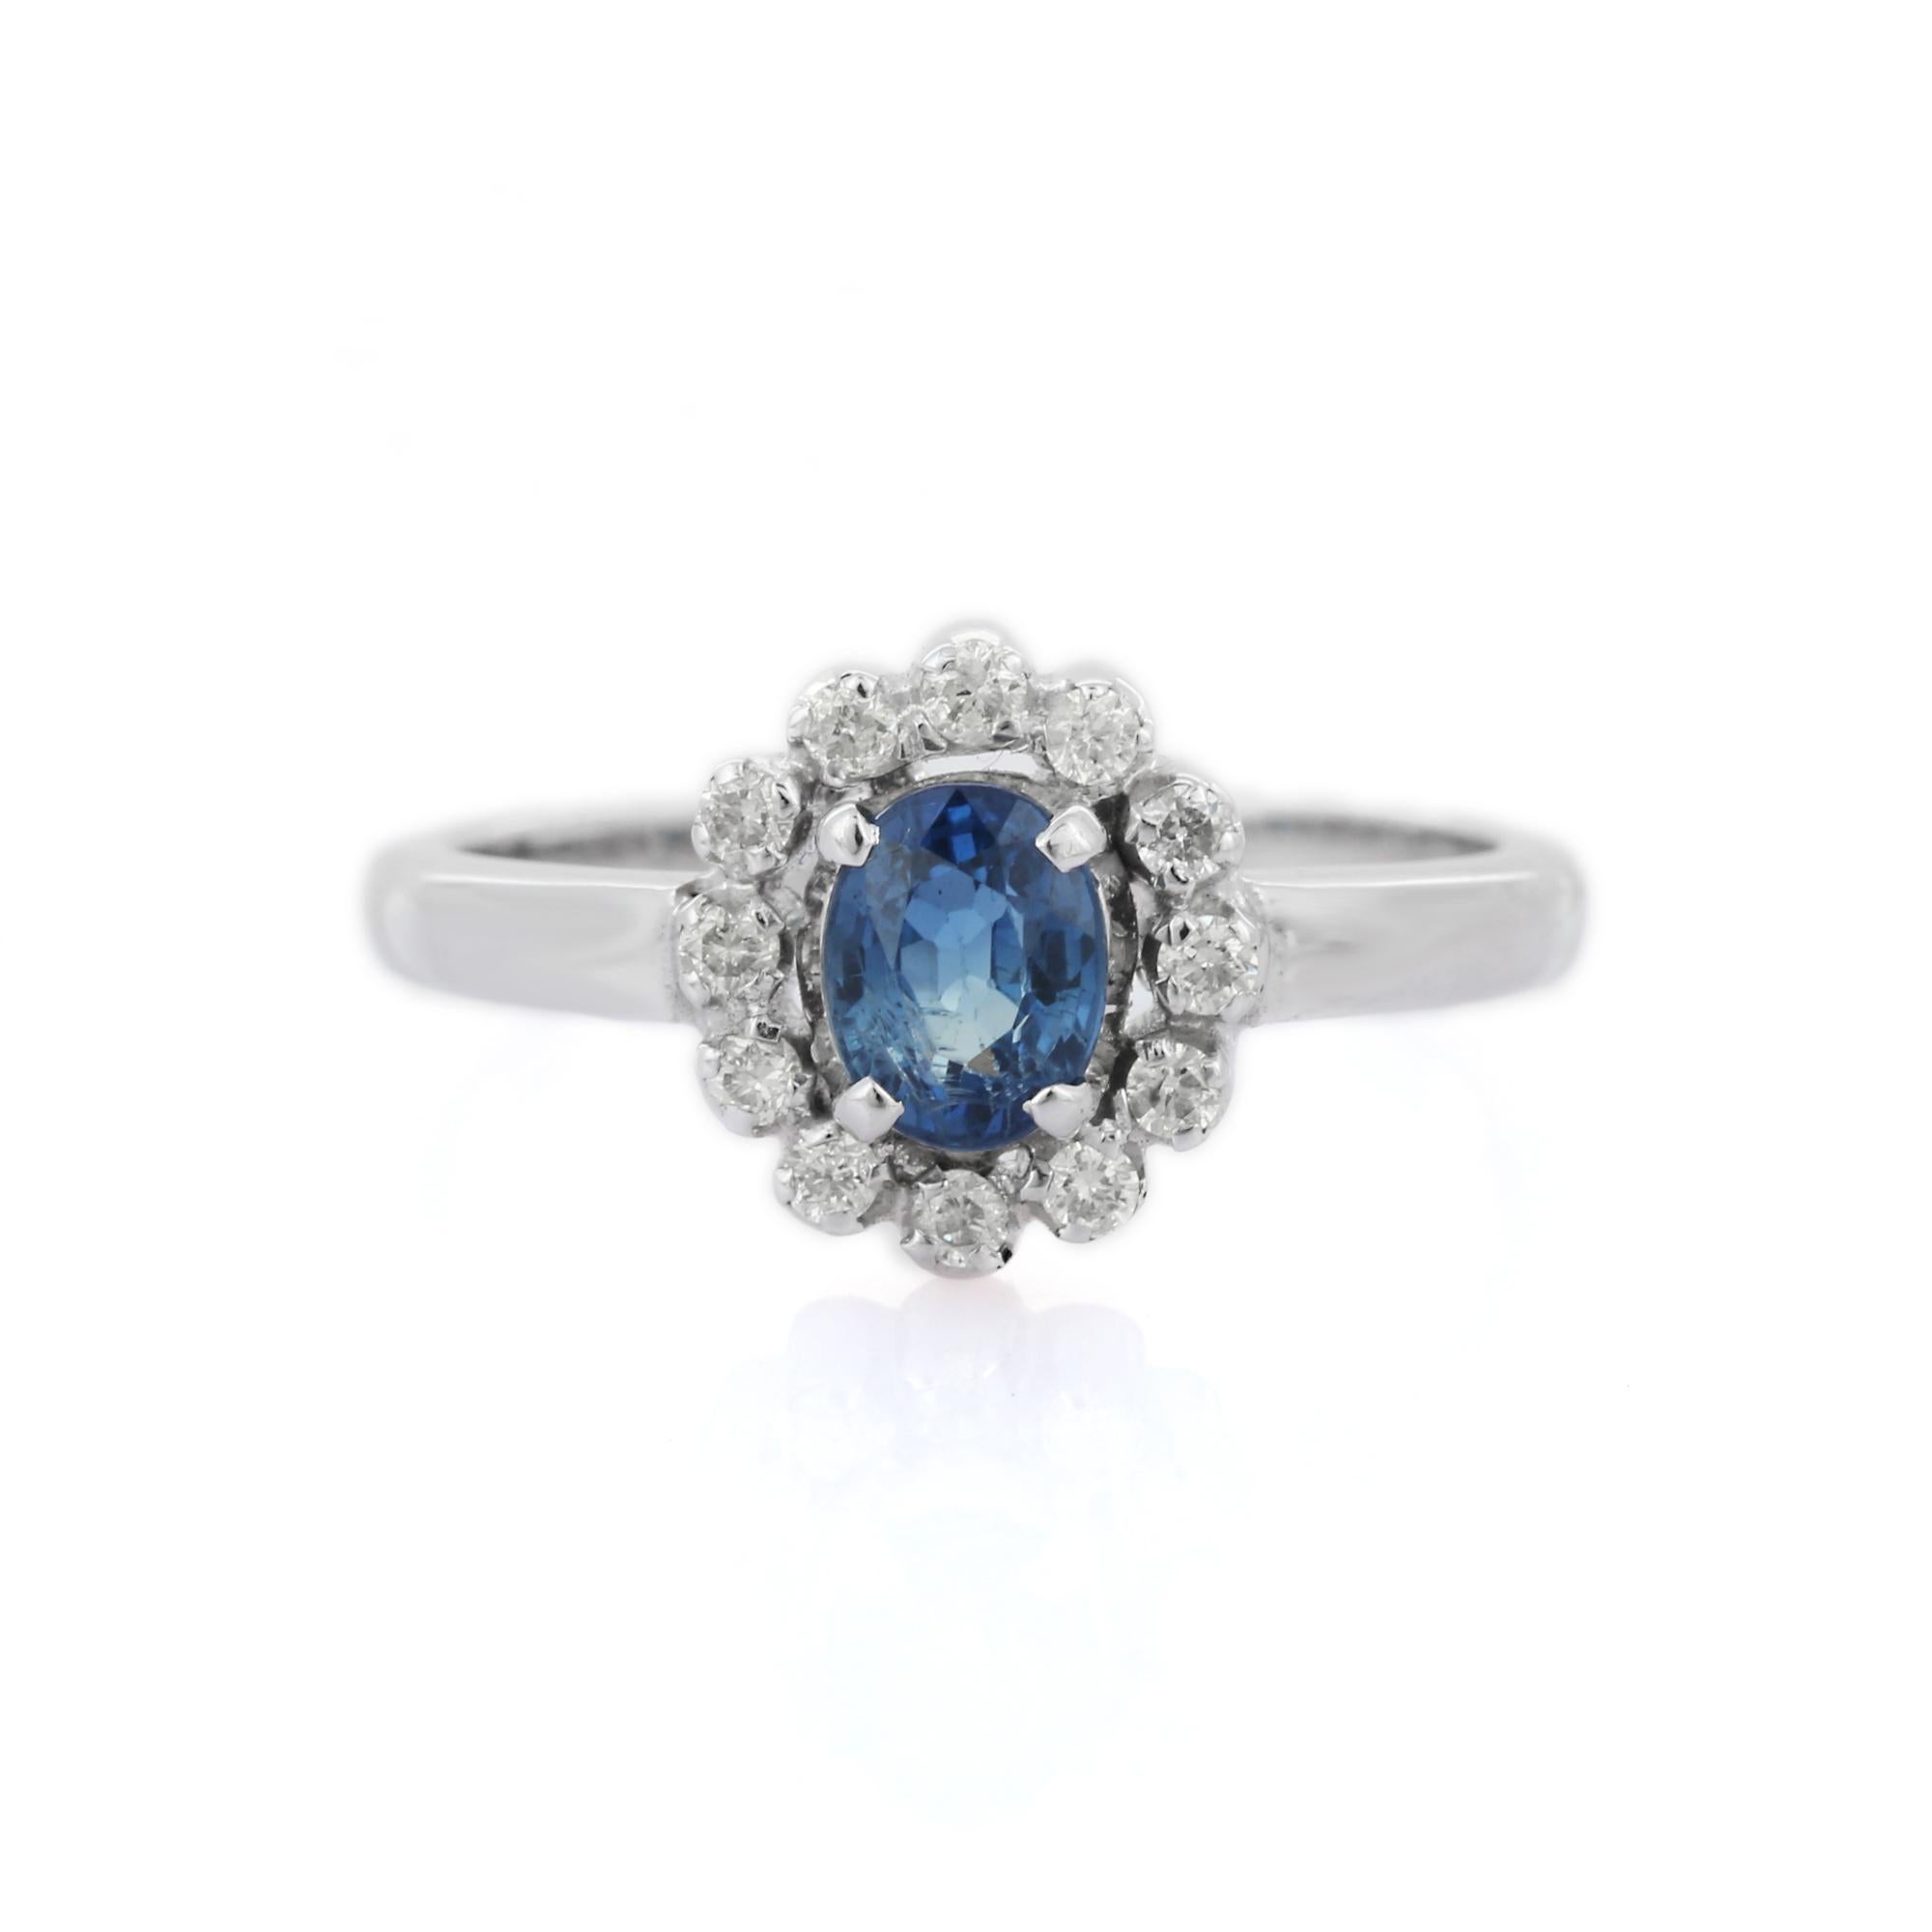 For Sale:  14K White Gold Halo Diamond and Sapphire Ring, Sapphire Diamond Halo Ring 2